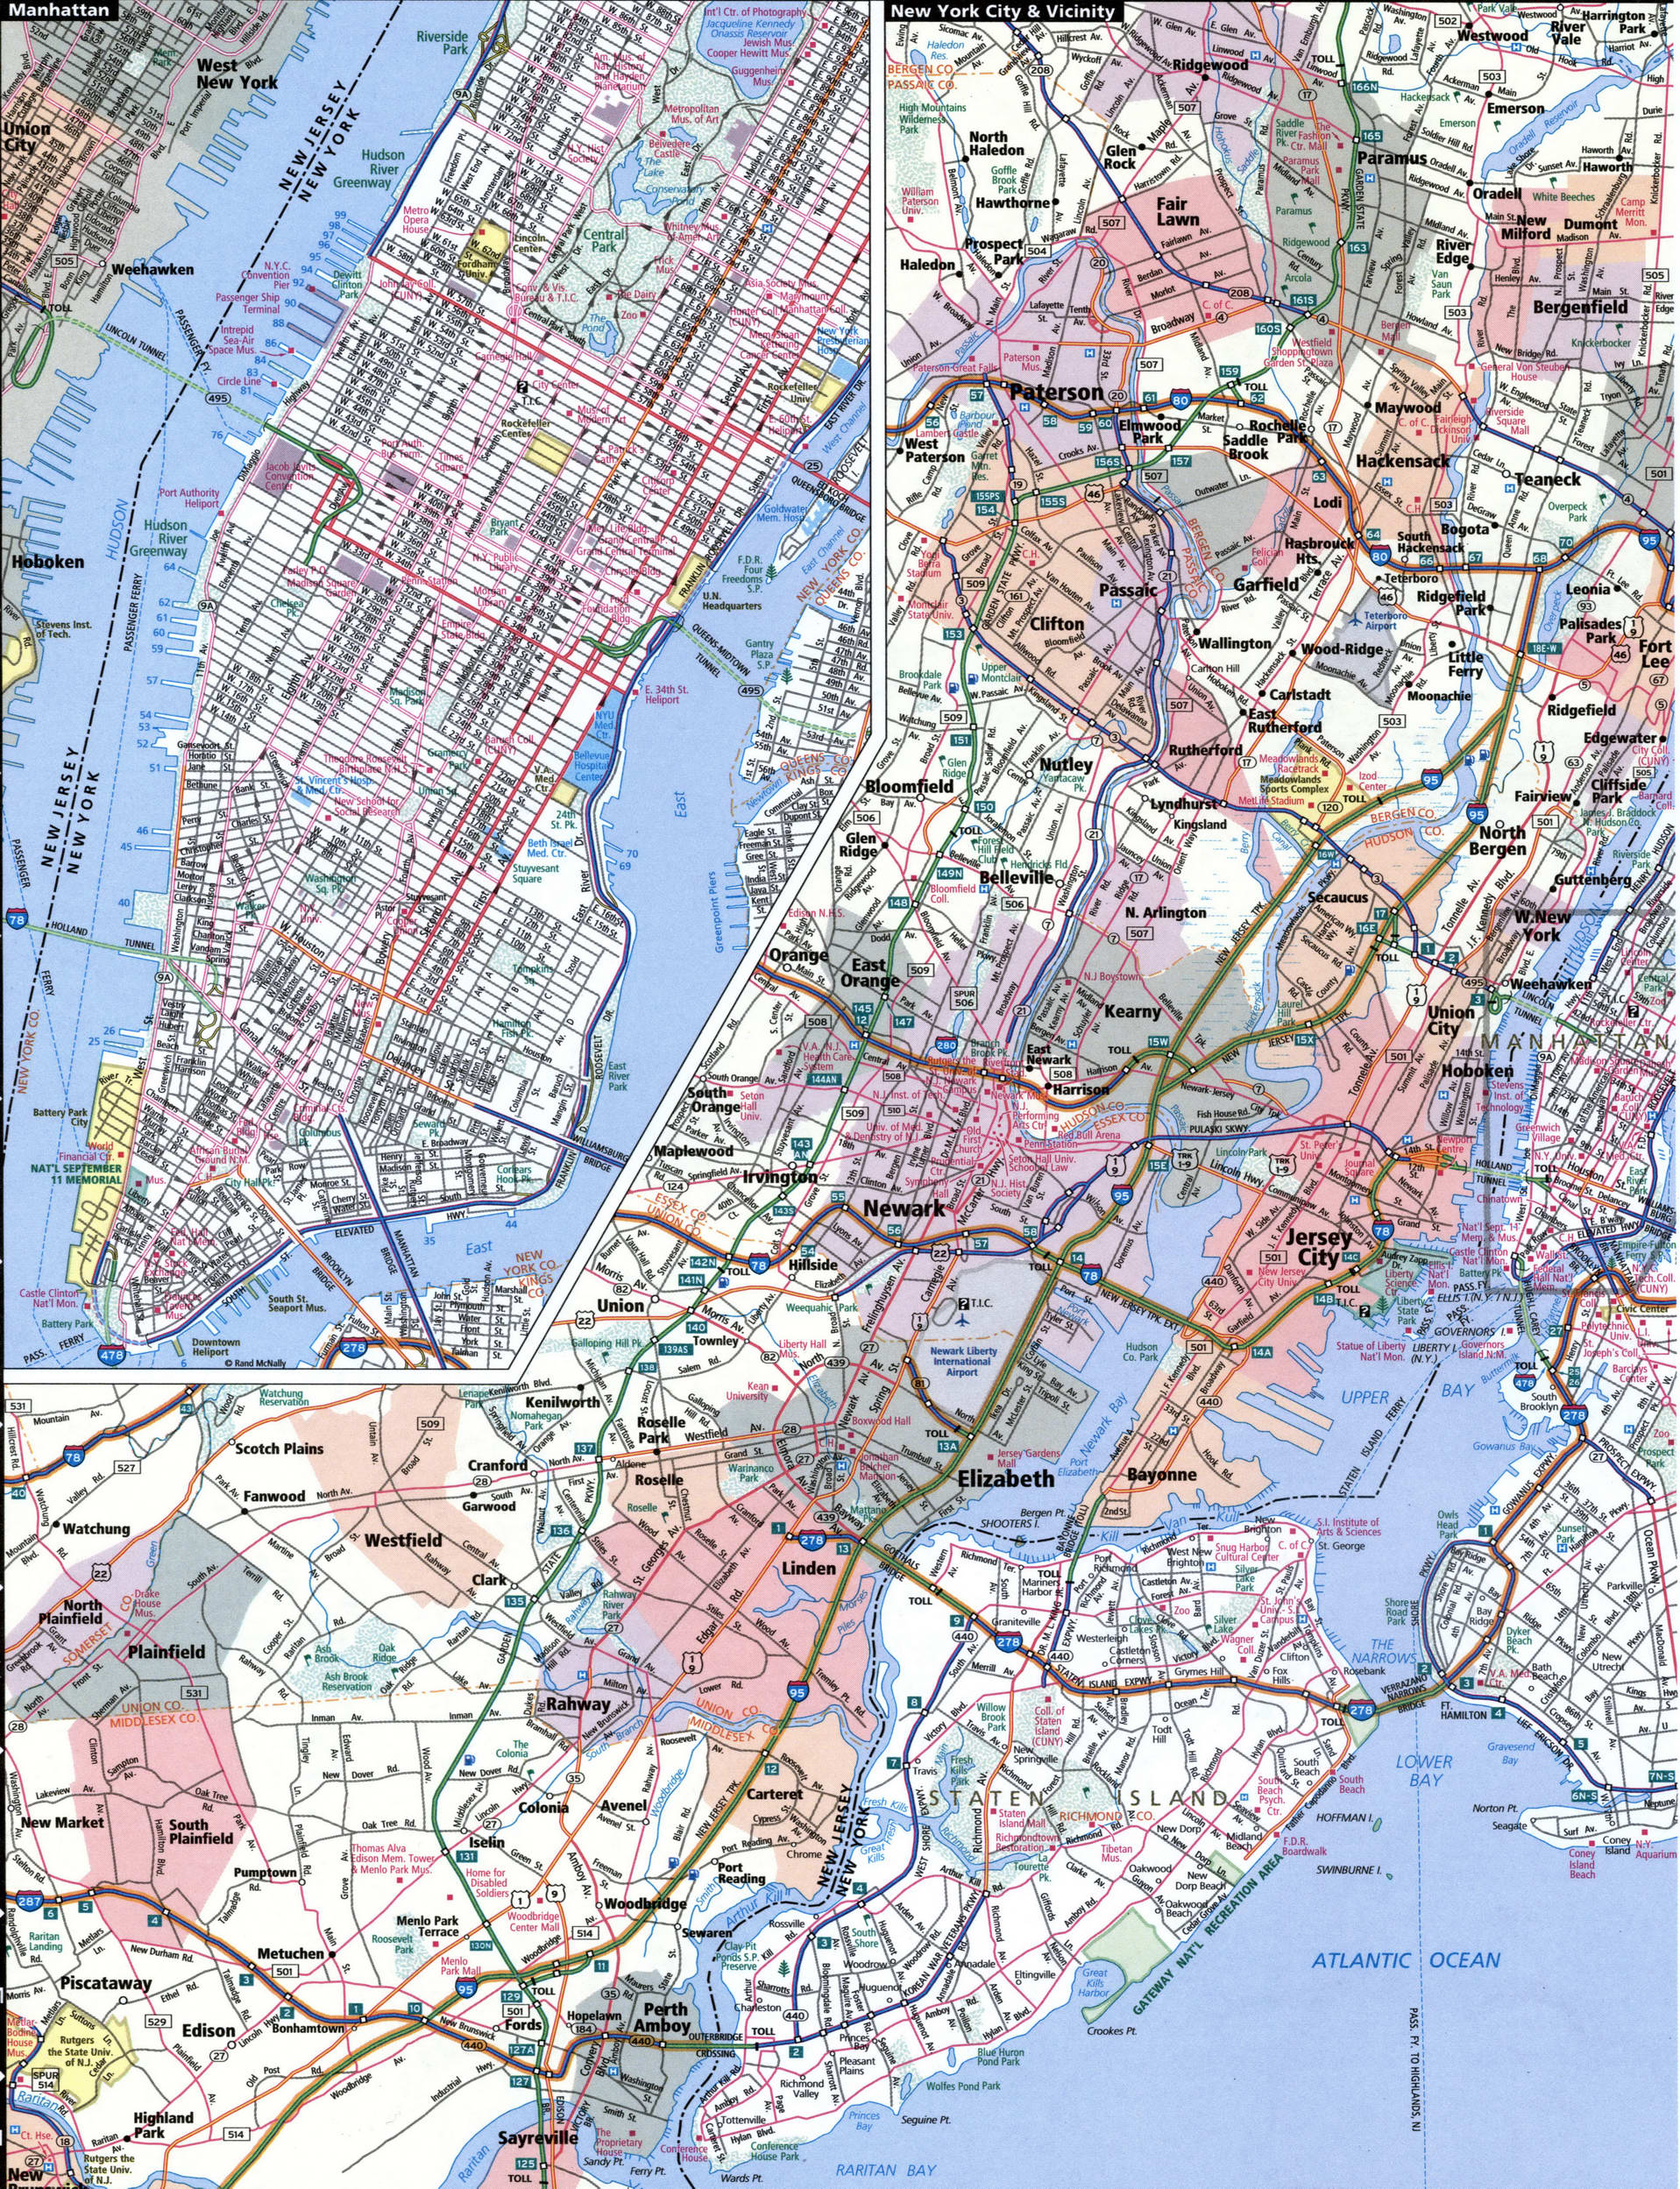 New York city road map for truck drivers toll and free highways map - usa